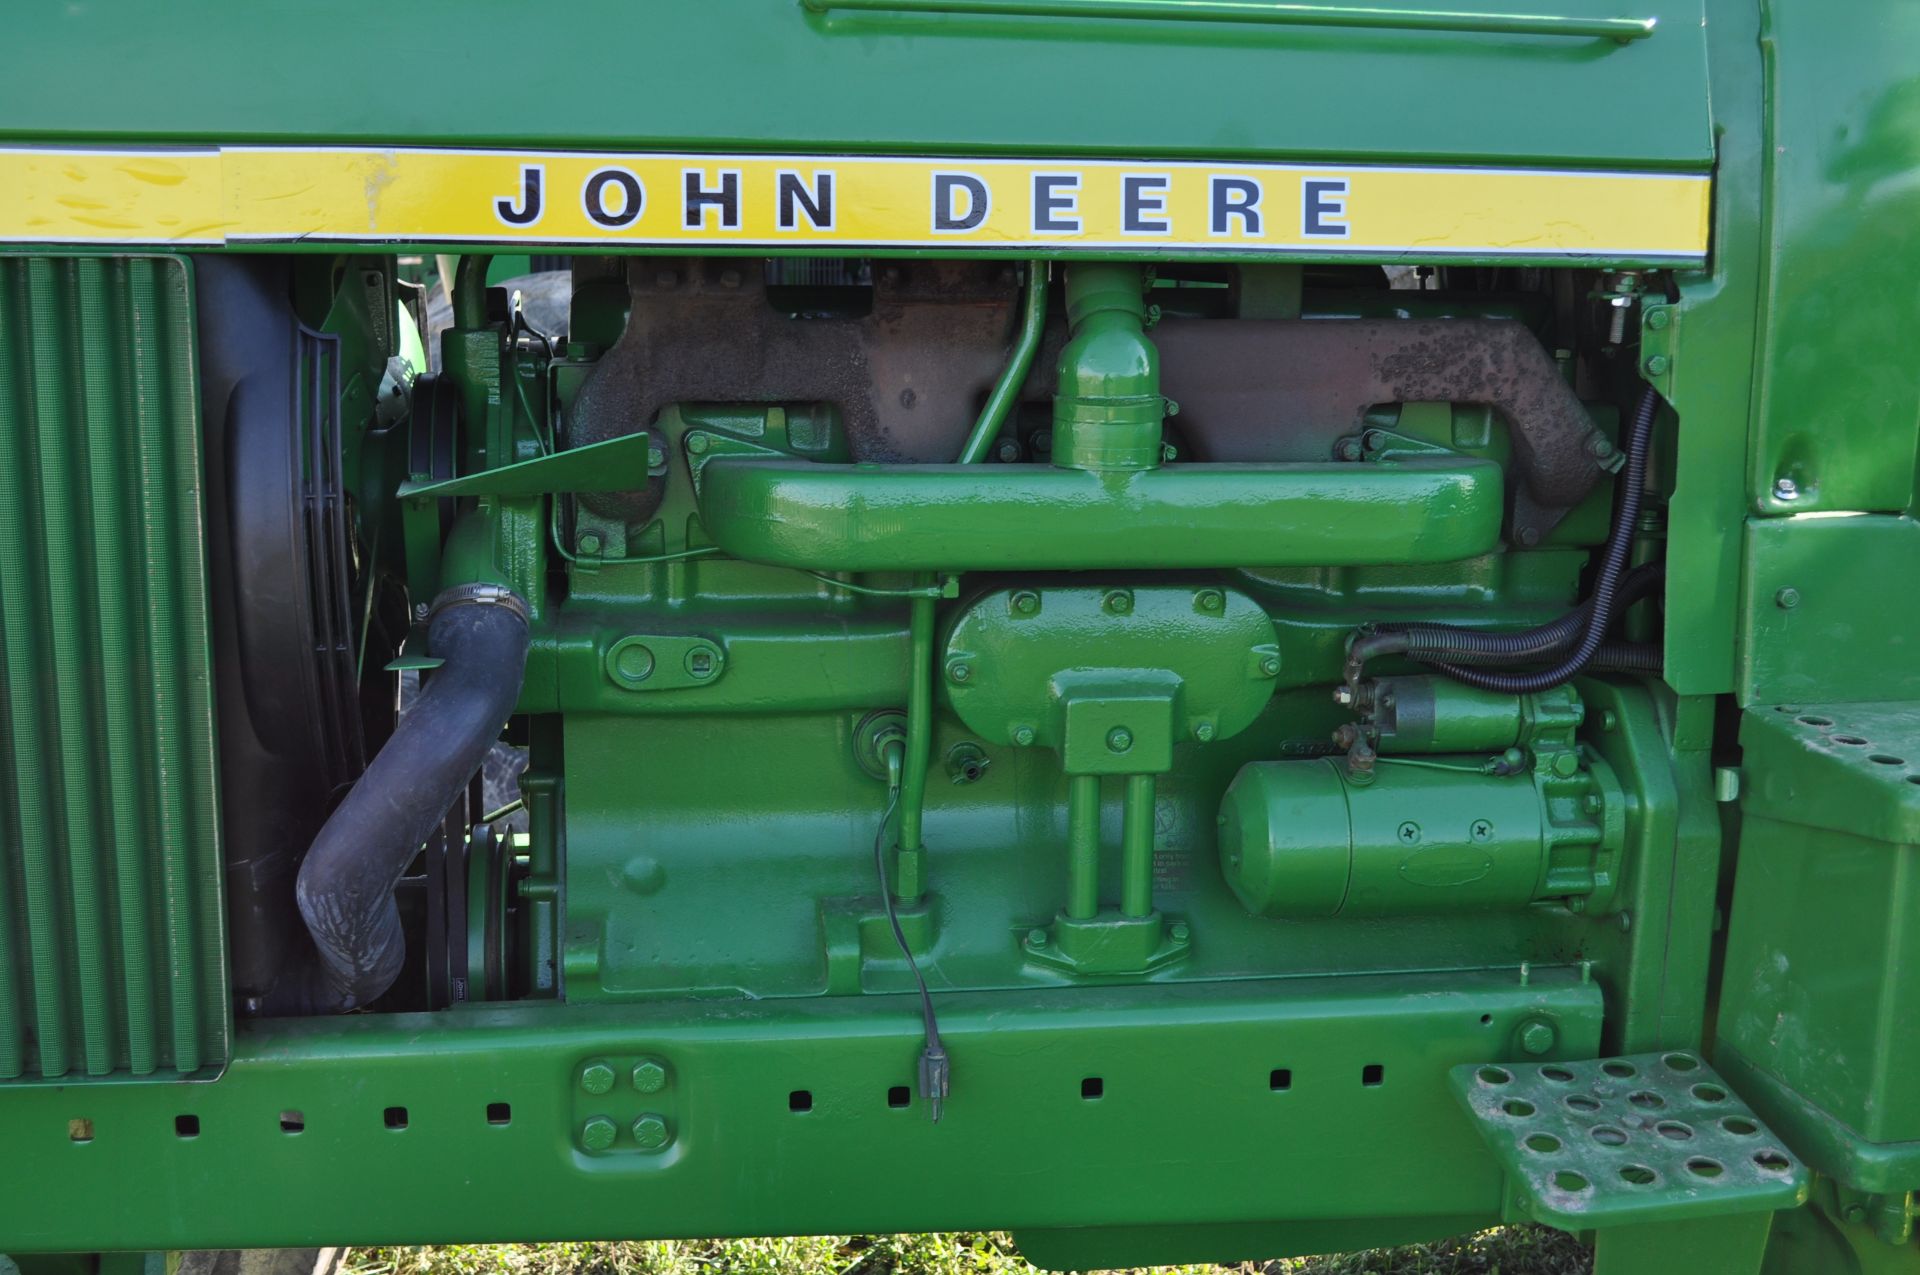 John Deere 4430 tractor, Syncro-Range trans, dual hydr, 3-pt, 540/1000 PTO, 18.4-38 rears & 11.00-18 - Image 12 of 21